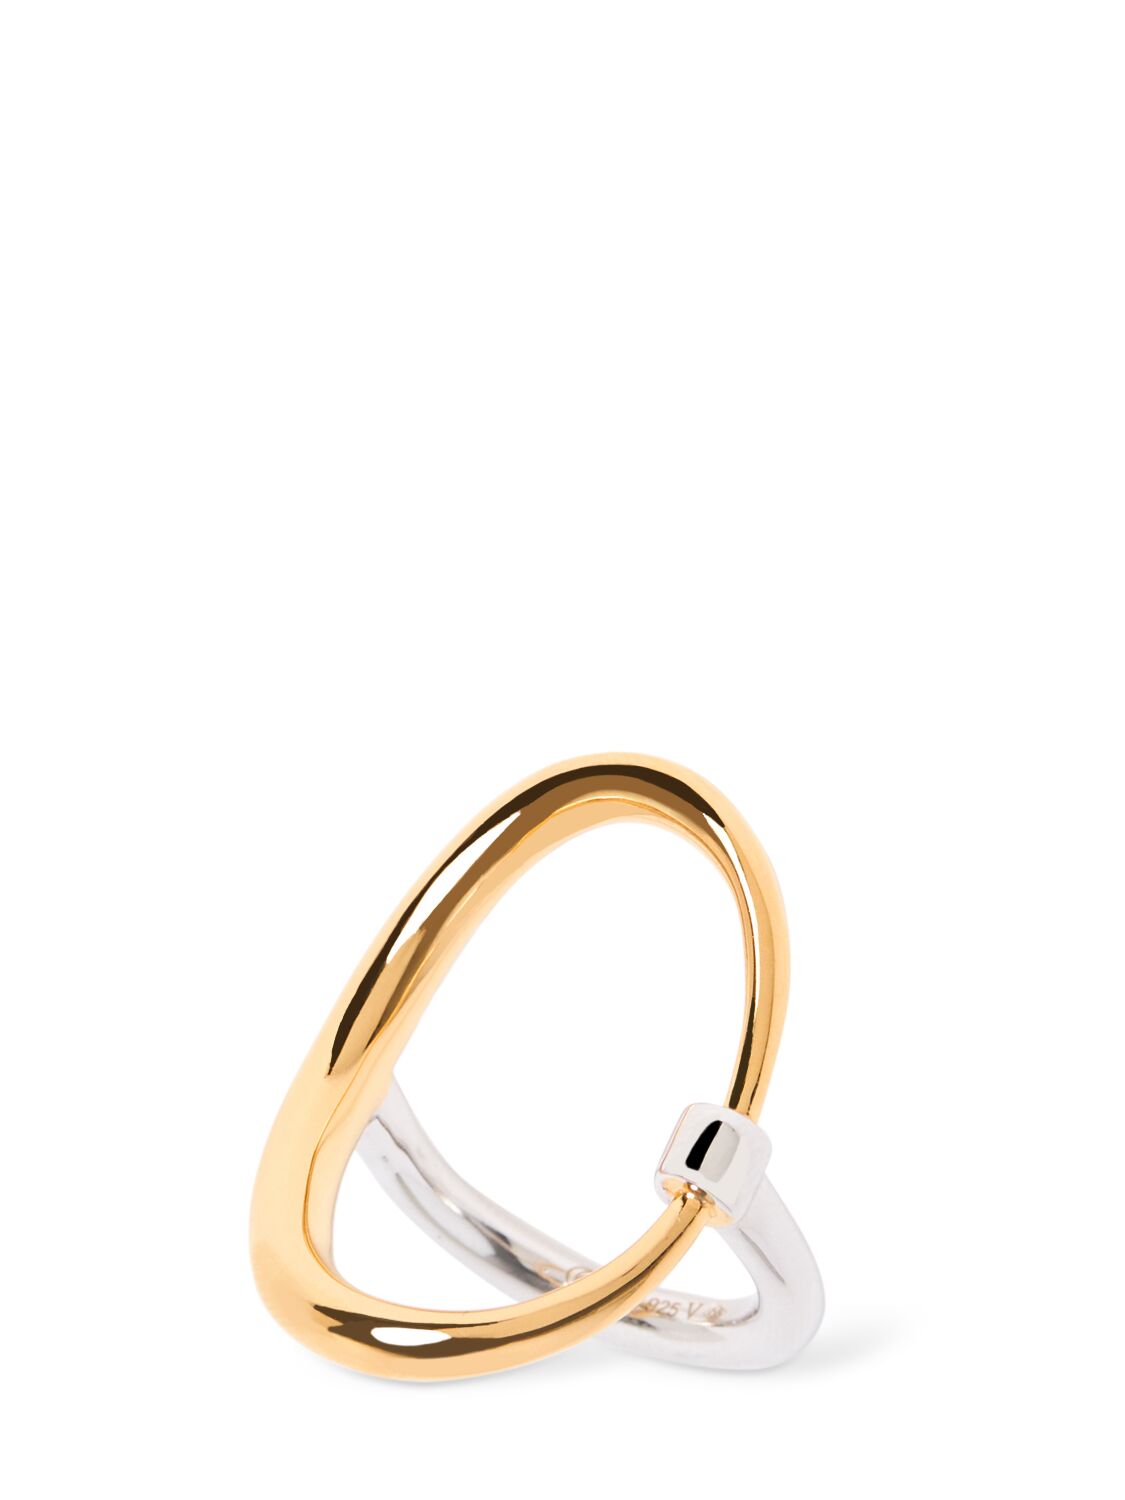 Charlotte Chesnais Bague Turtle Vermeil & Silver Ring In Gold,silver